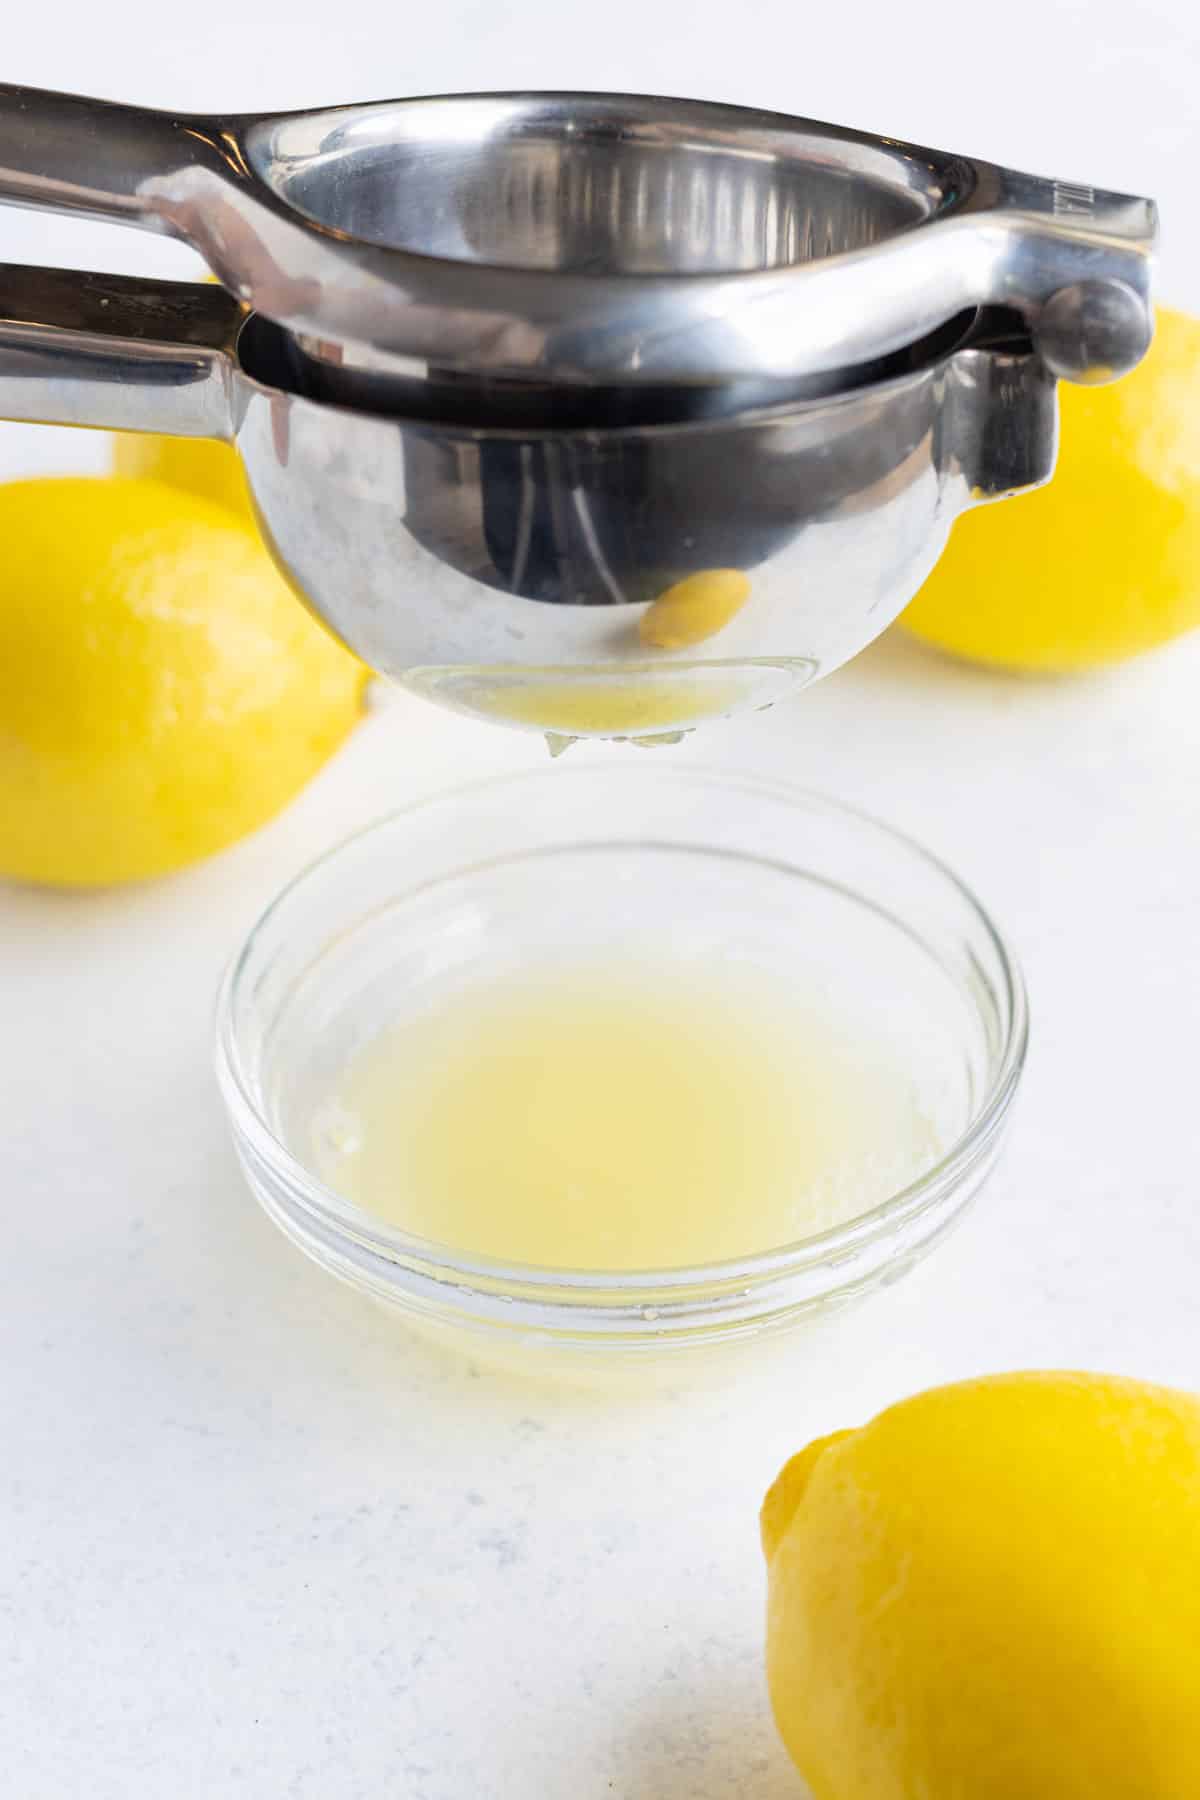 Lemon juice being squeezed into a small glass bowl by a citrus juicer.